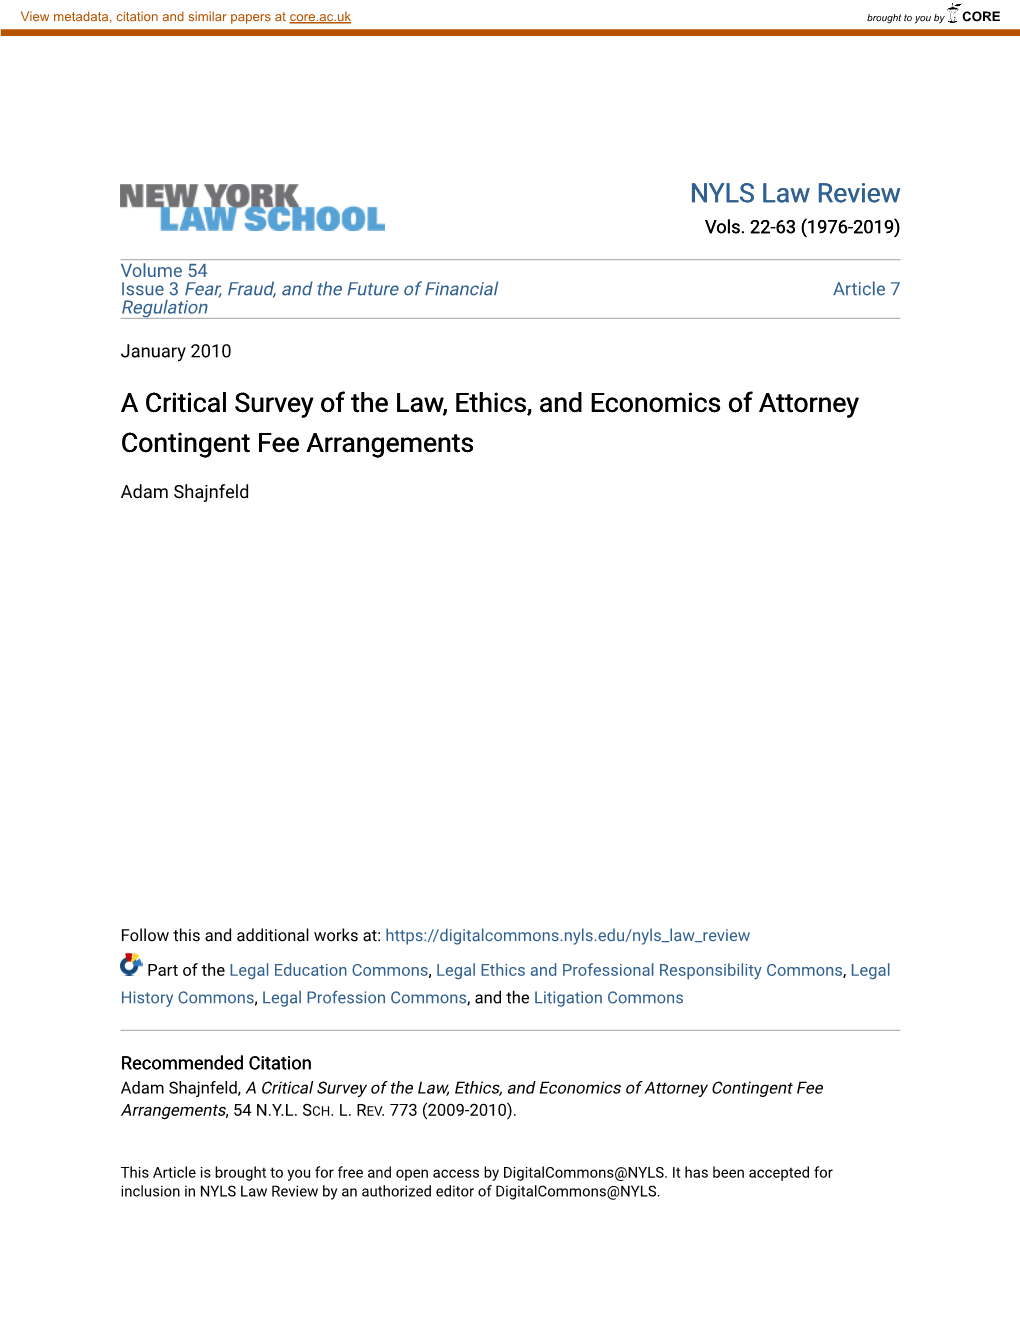 A Critical Survey of the Law, Ethics, and Economics of Attorney Contingent Fee Arrangements